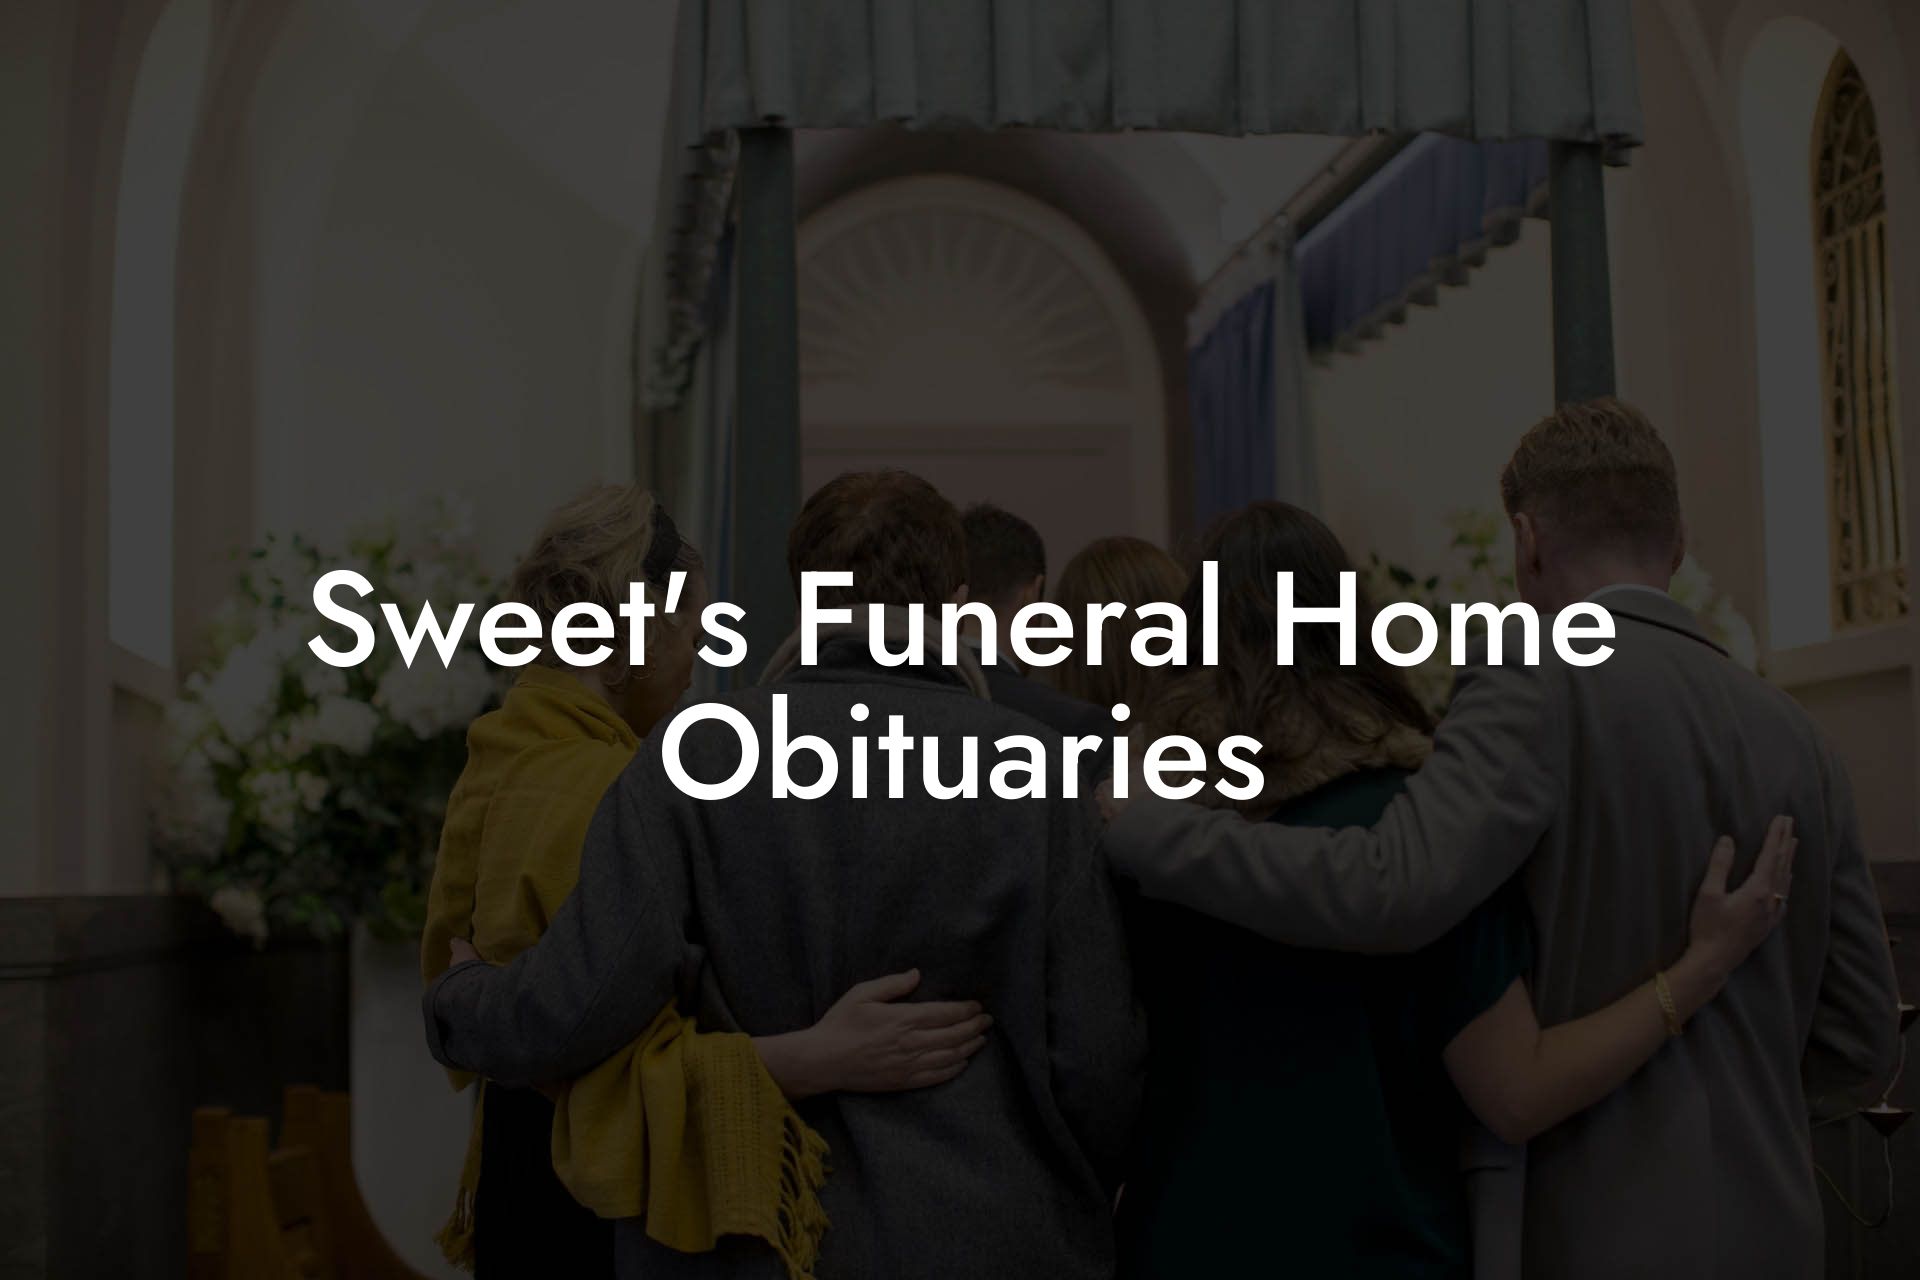 Sweet's Funeral Home Obituaries